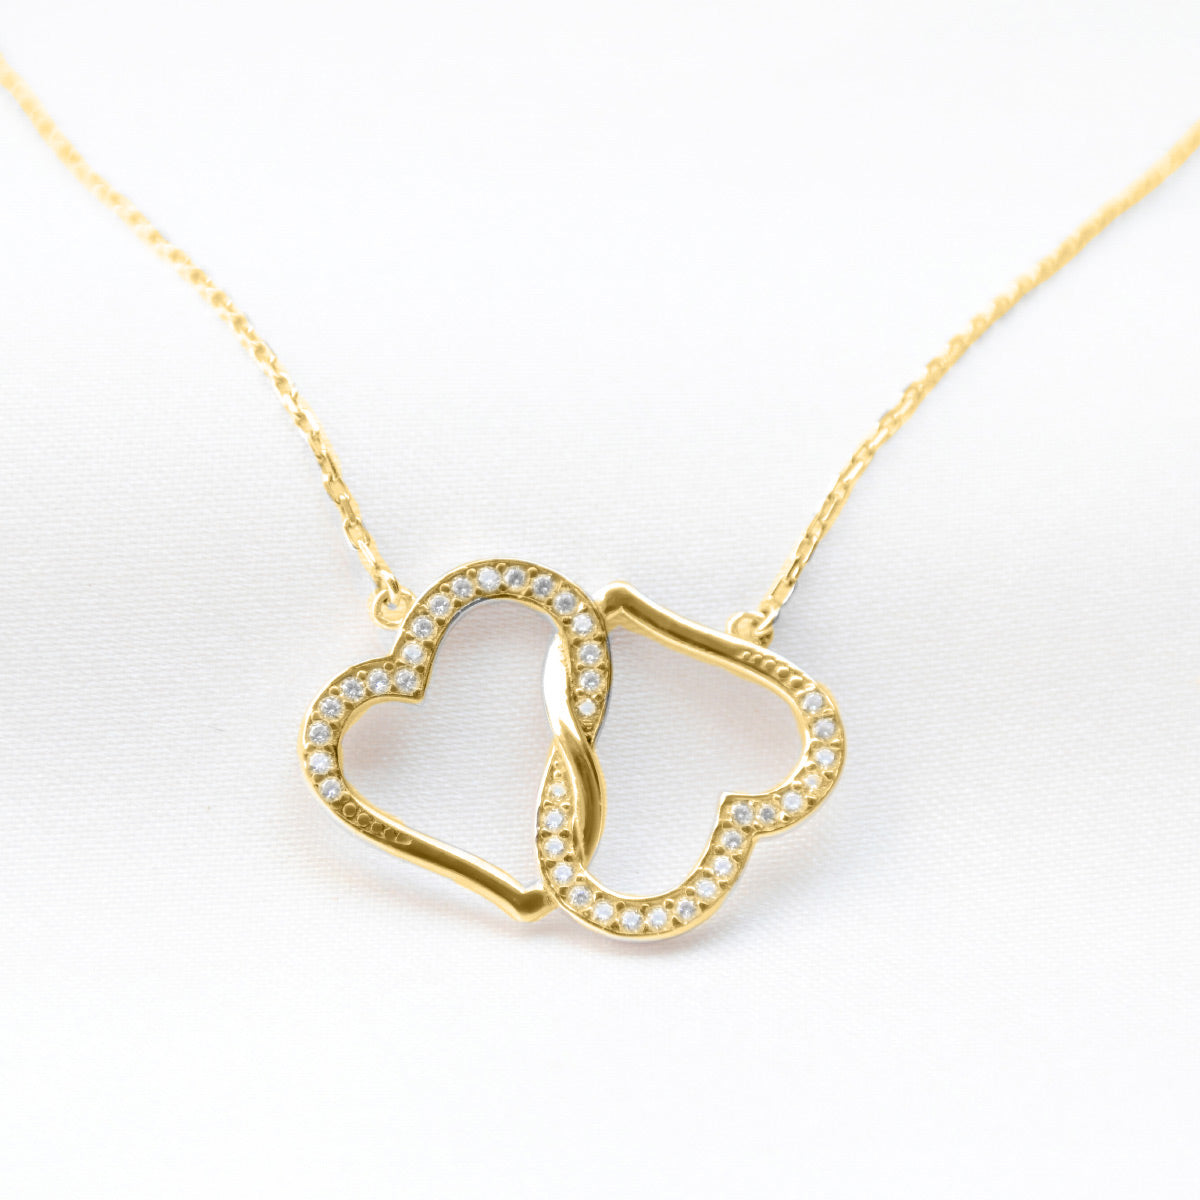 Happy New Year - Gold Joined Hearts Necklace Gift Set